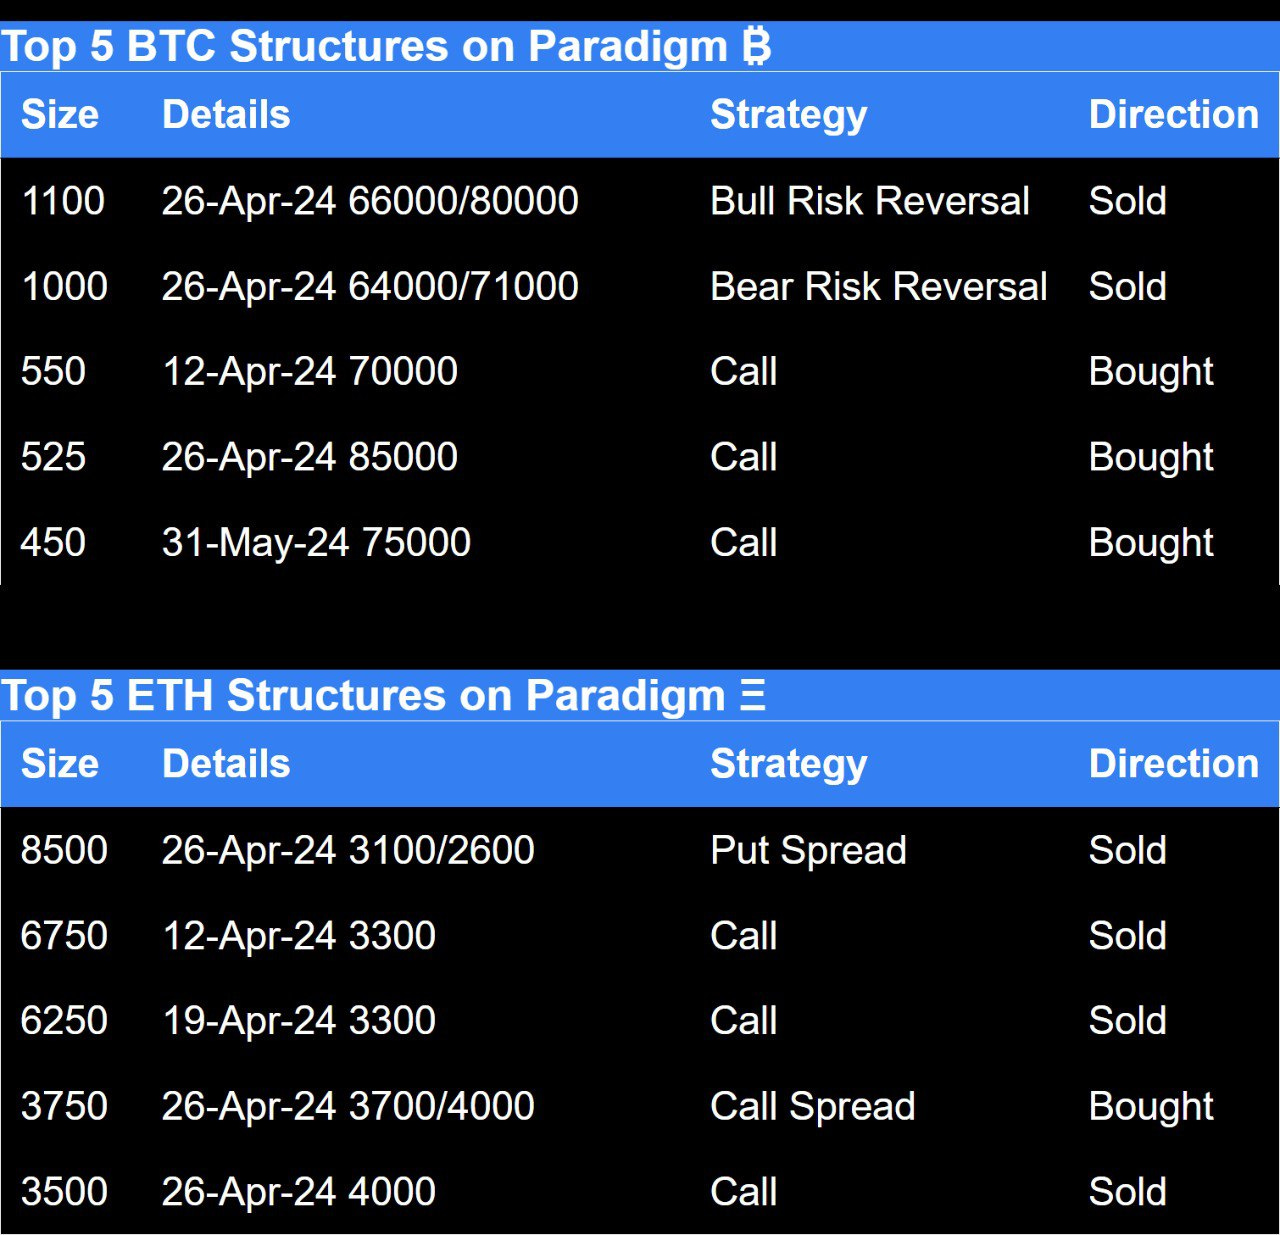 Paradigm Top 5 BTC structures and top 5 ETH structures in options